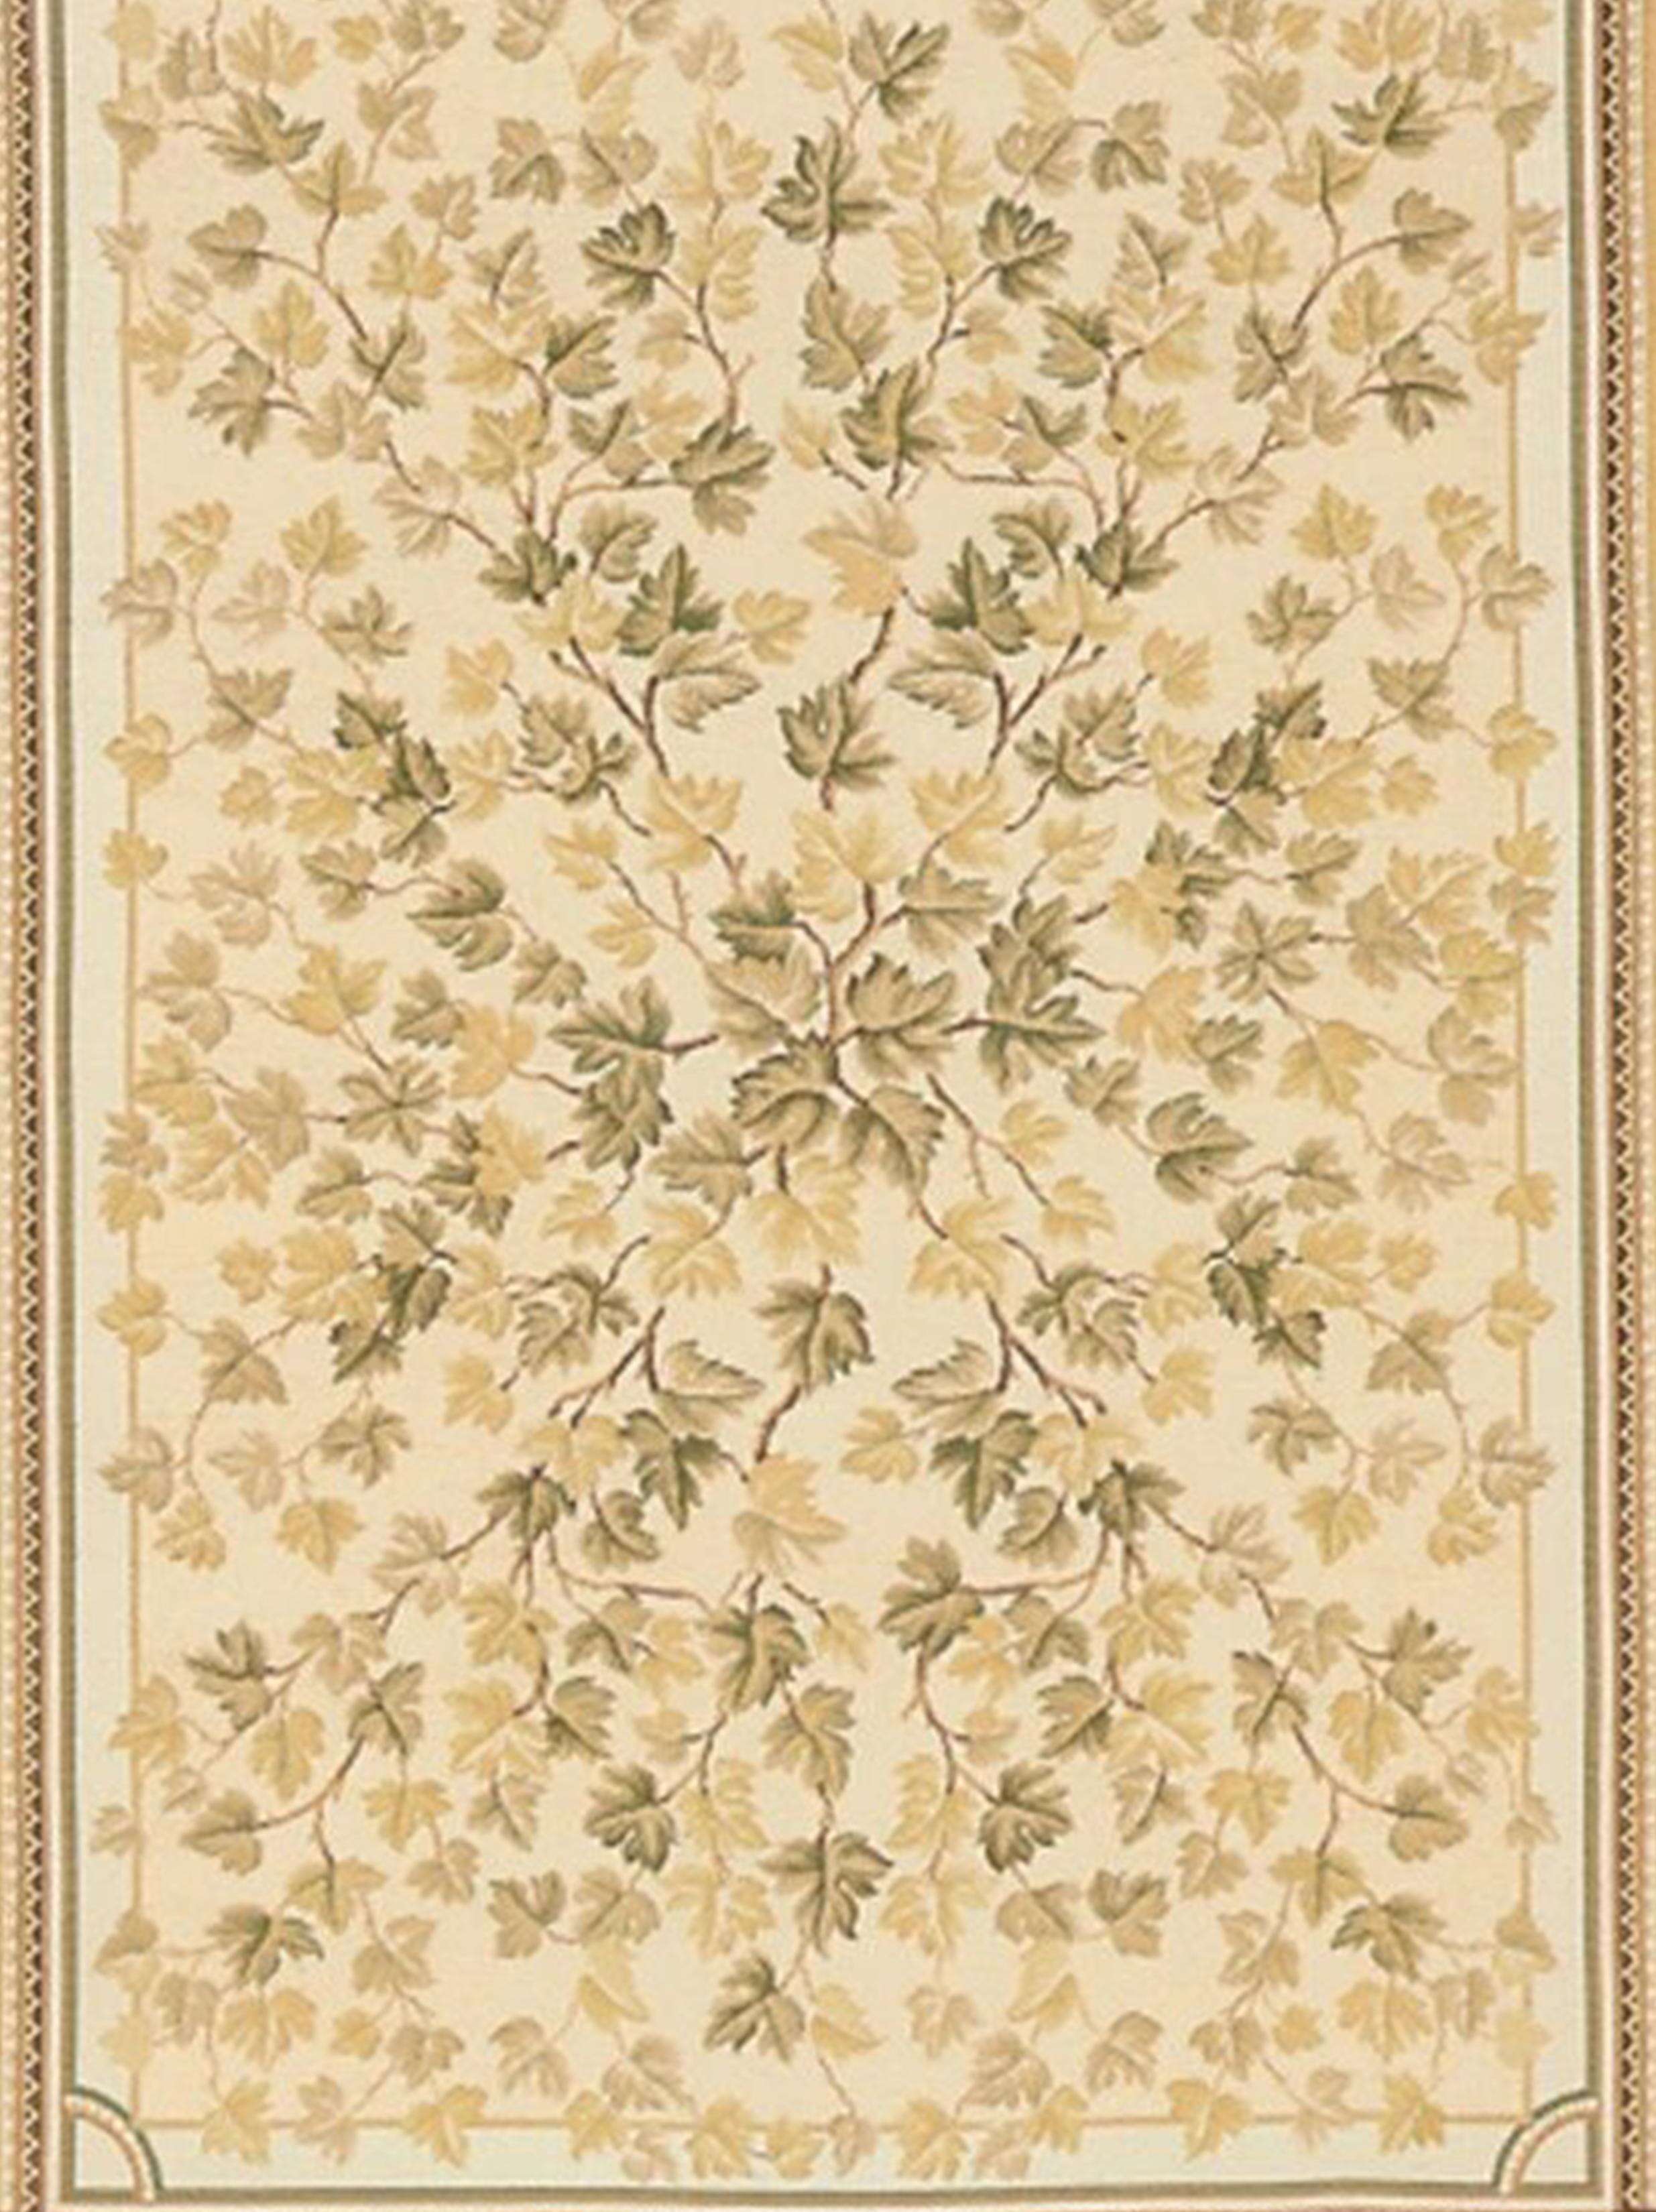 Based on an original Asmara painting by Elizabeth Moisan inspired by an Italian painted ceiling and ceiling decorations in Mark Twain's Connecticut house. Autumn branches, laden with gold and sage leaves, stretch across a cream ground surrounded by